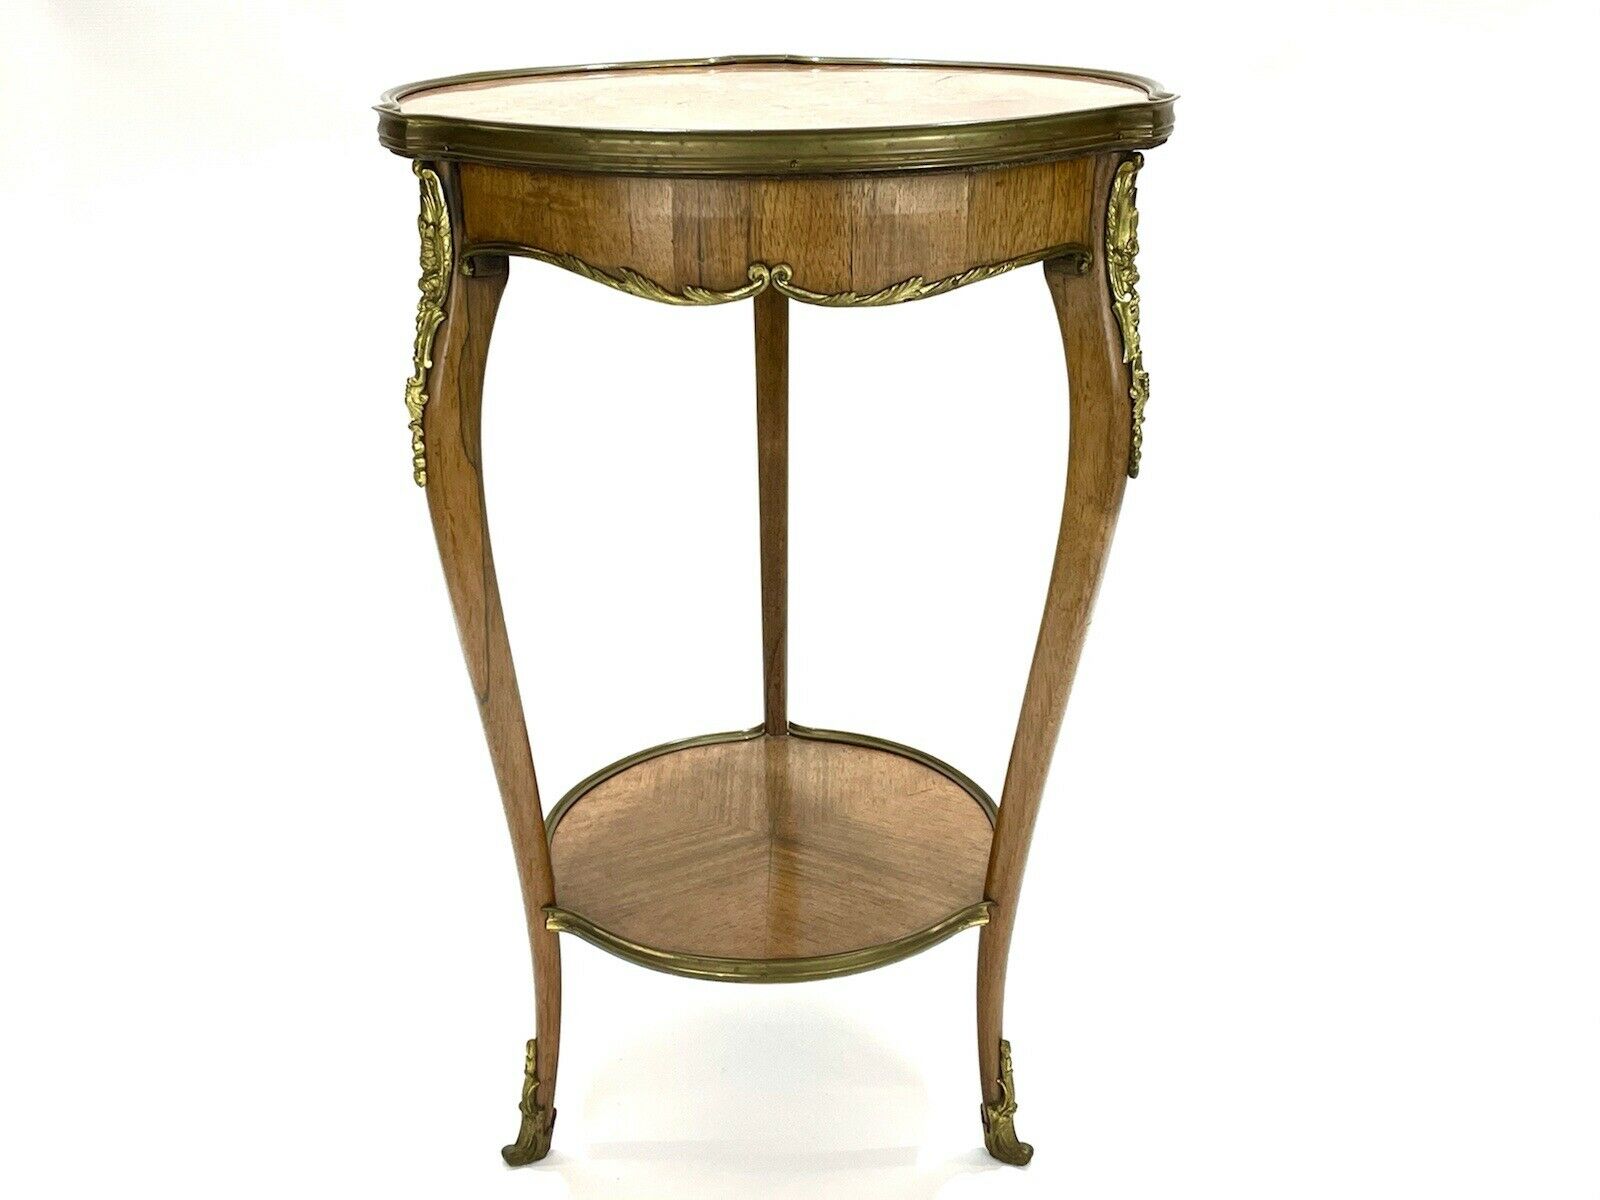 19th Century, French, Marble Top & Ormolu, Walnut Occasional Table